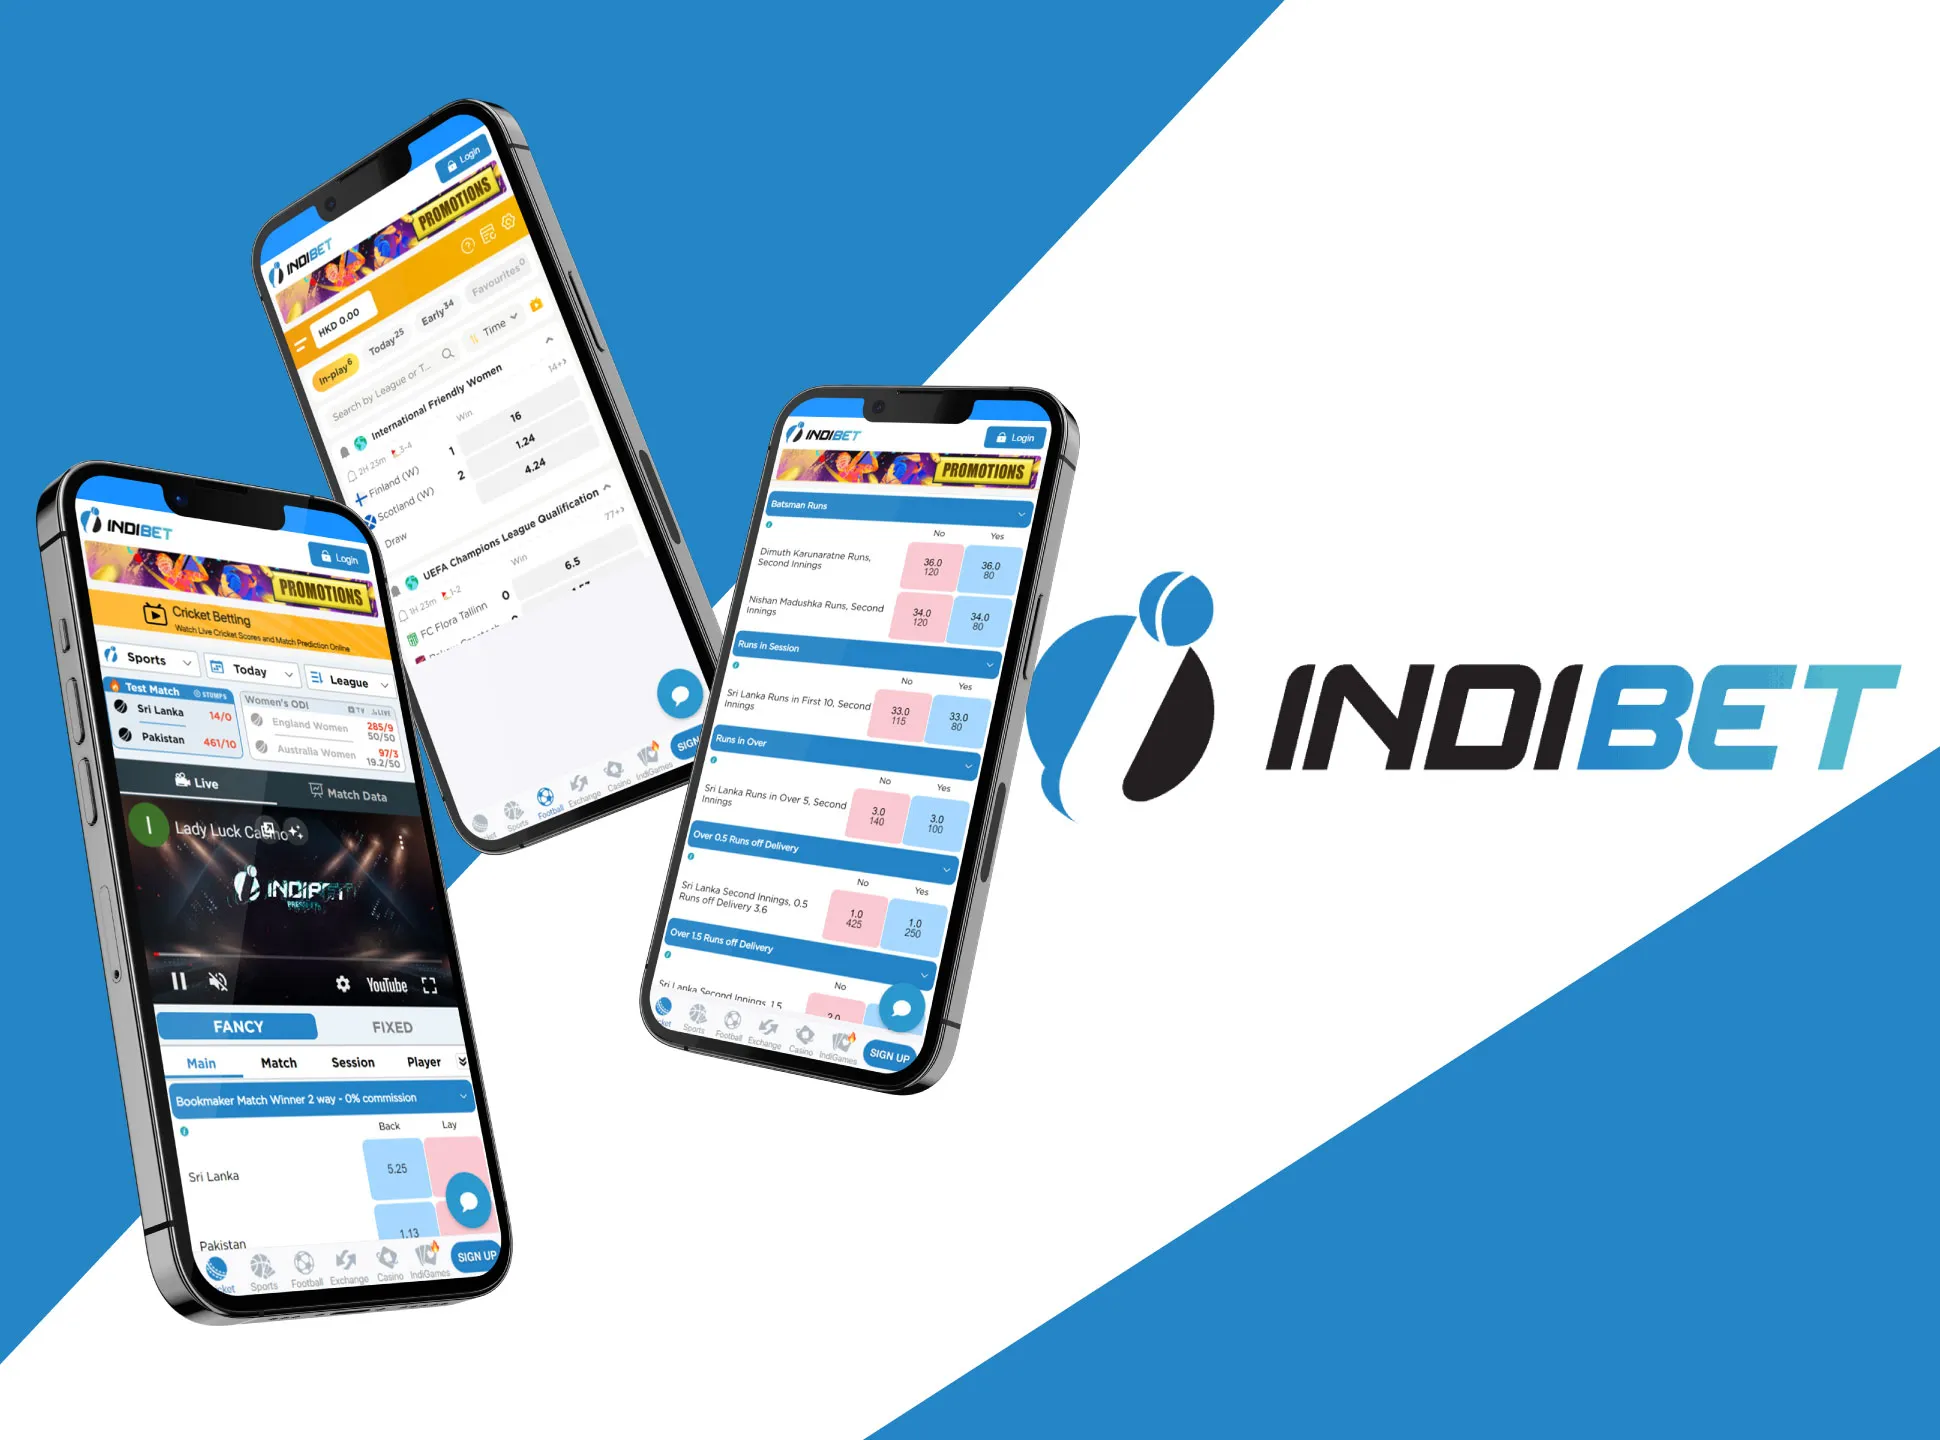 Use the mobile version of the Indibet website on your phone.